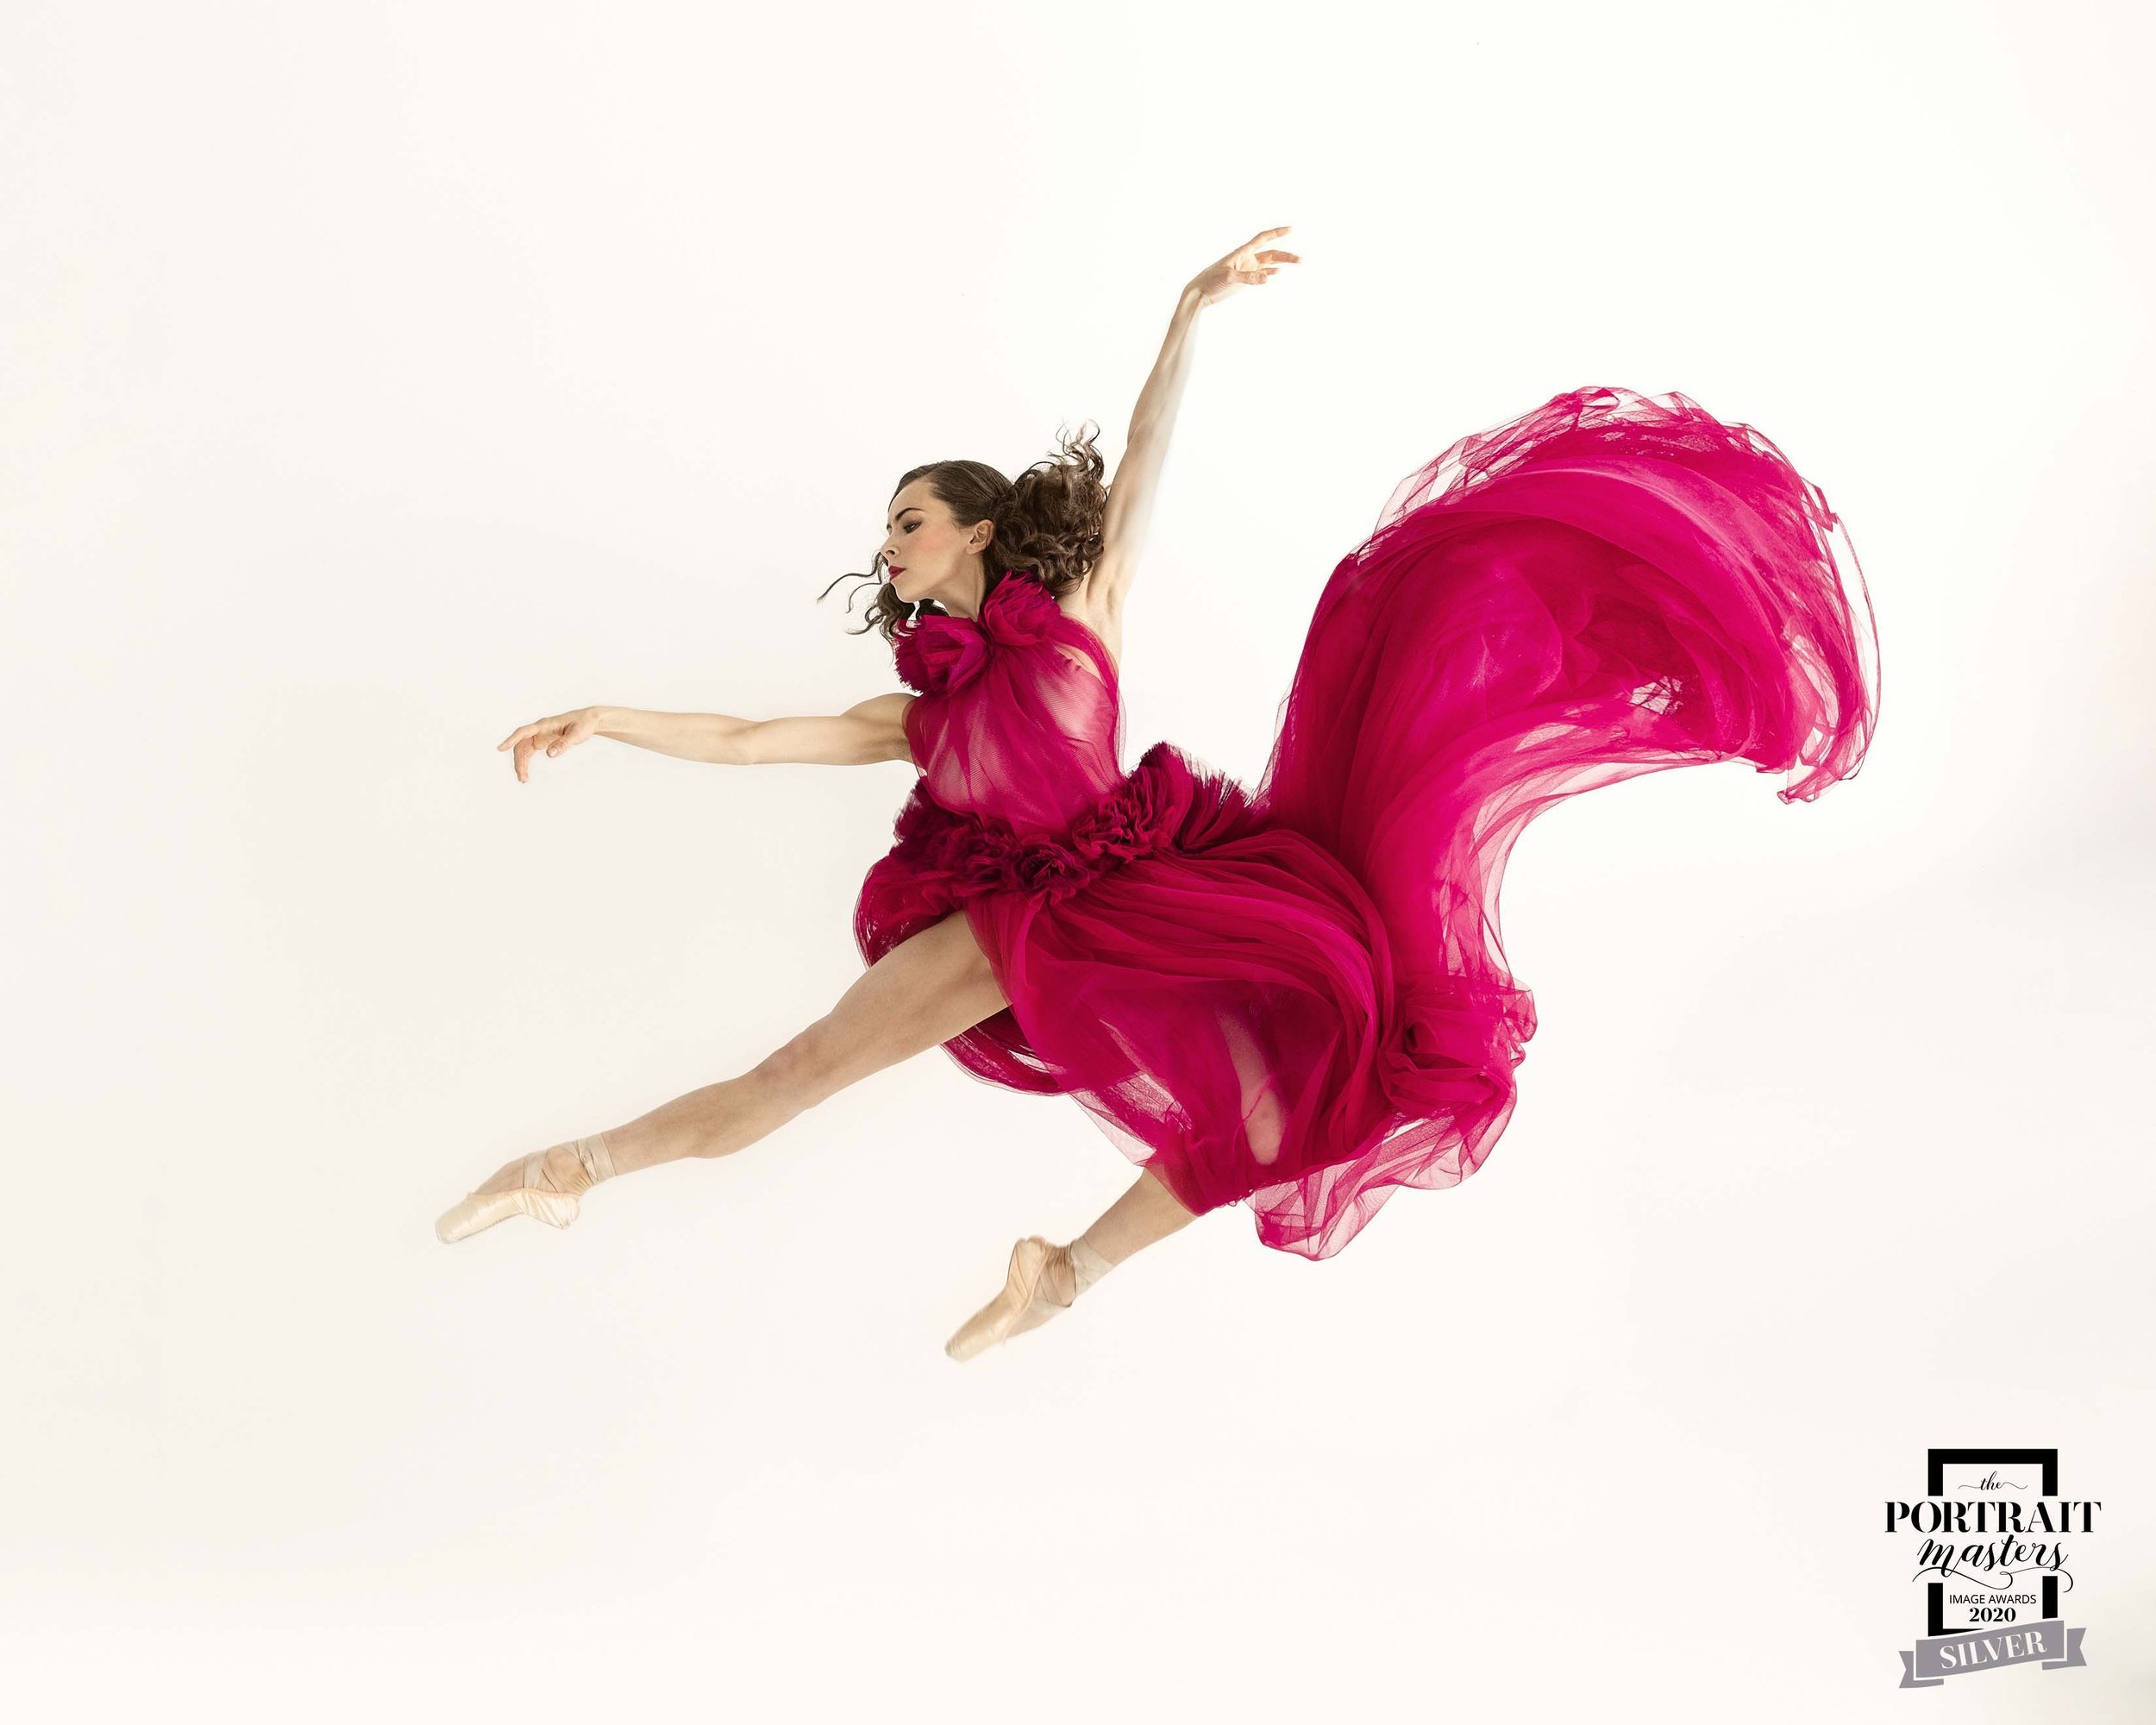 Woman jumping with fabric flowing during Motion Dance Portrait Session with Beauclair Photography